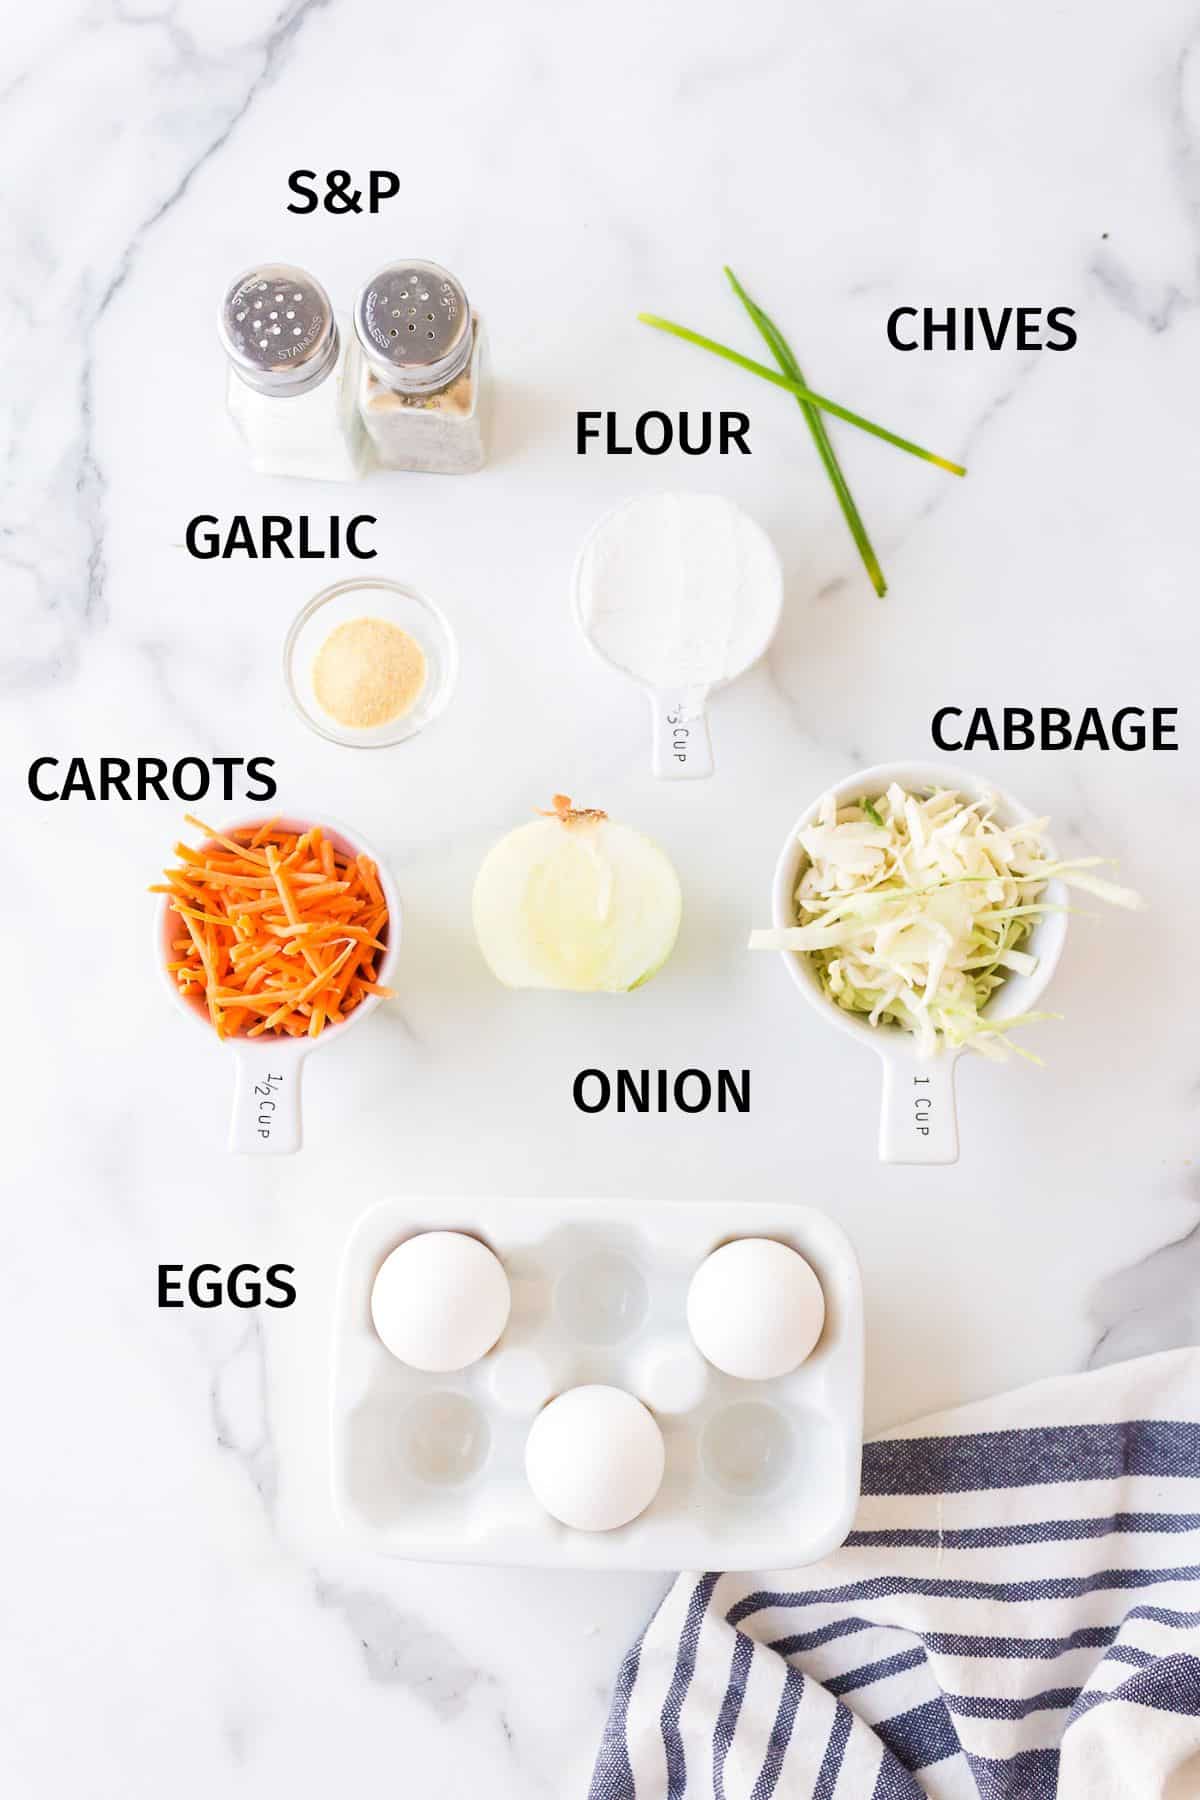 Ingredients to make cabbage fritters in small bowls on a white surface.